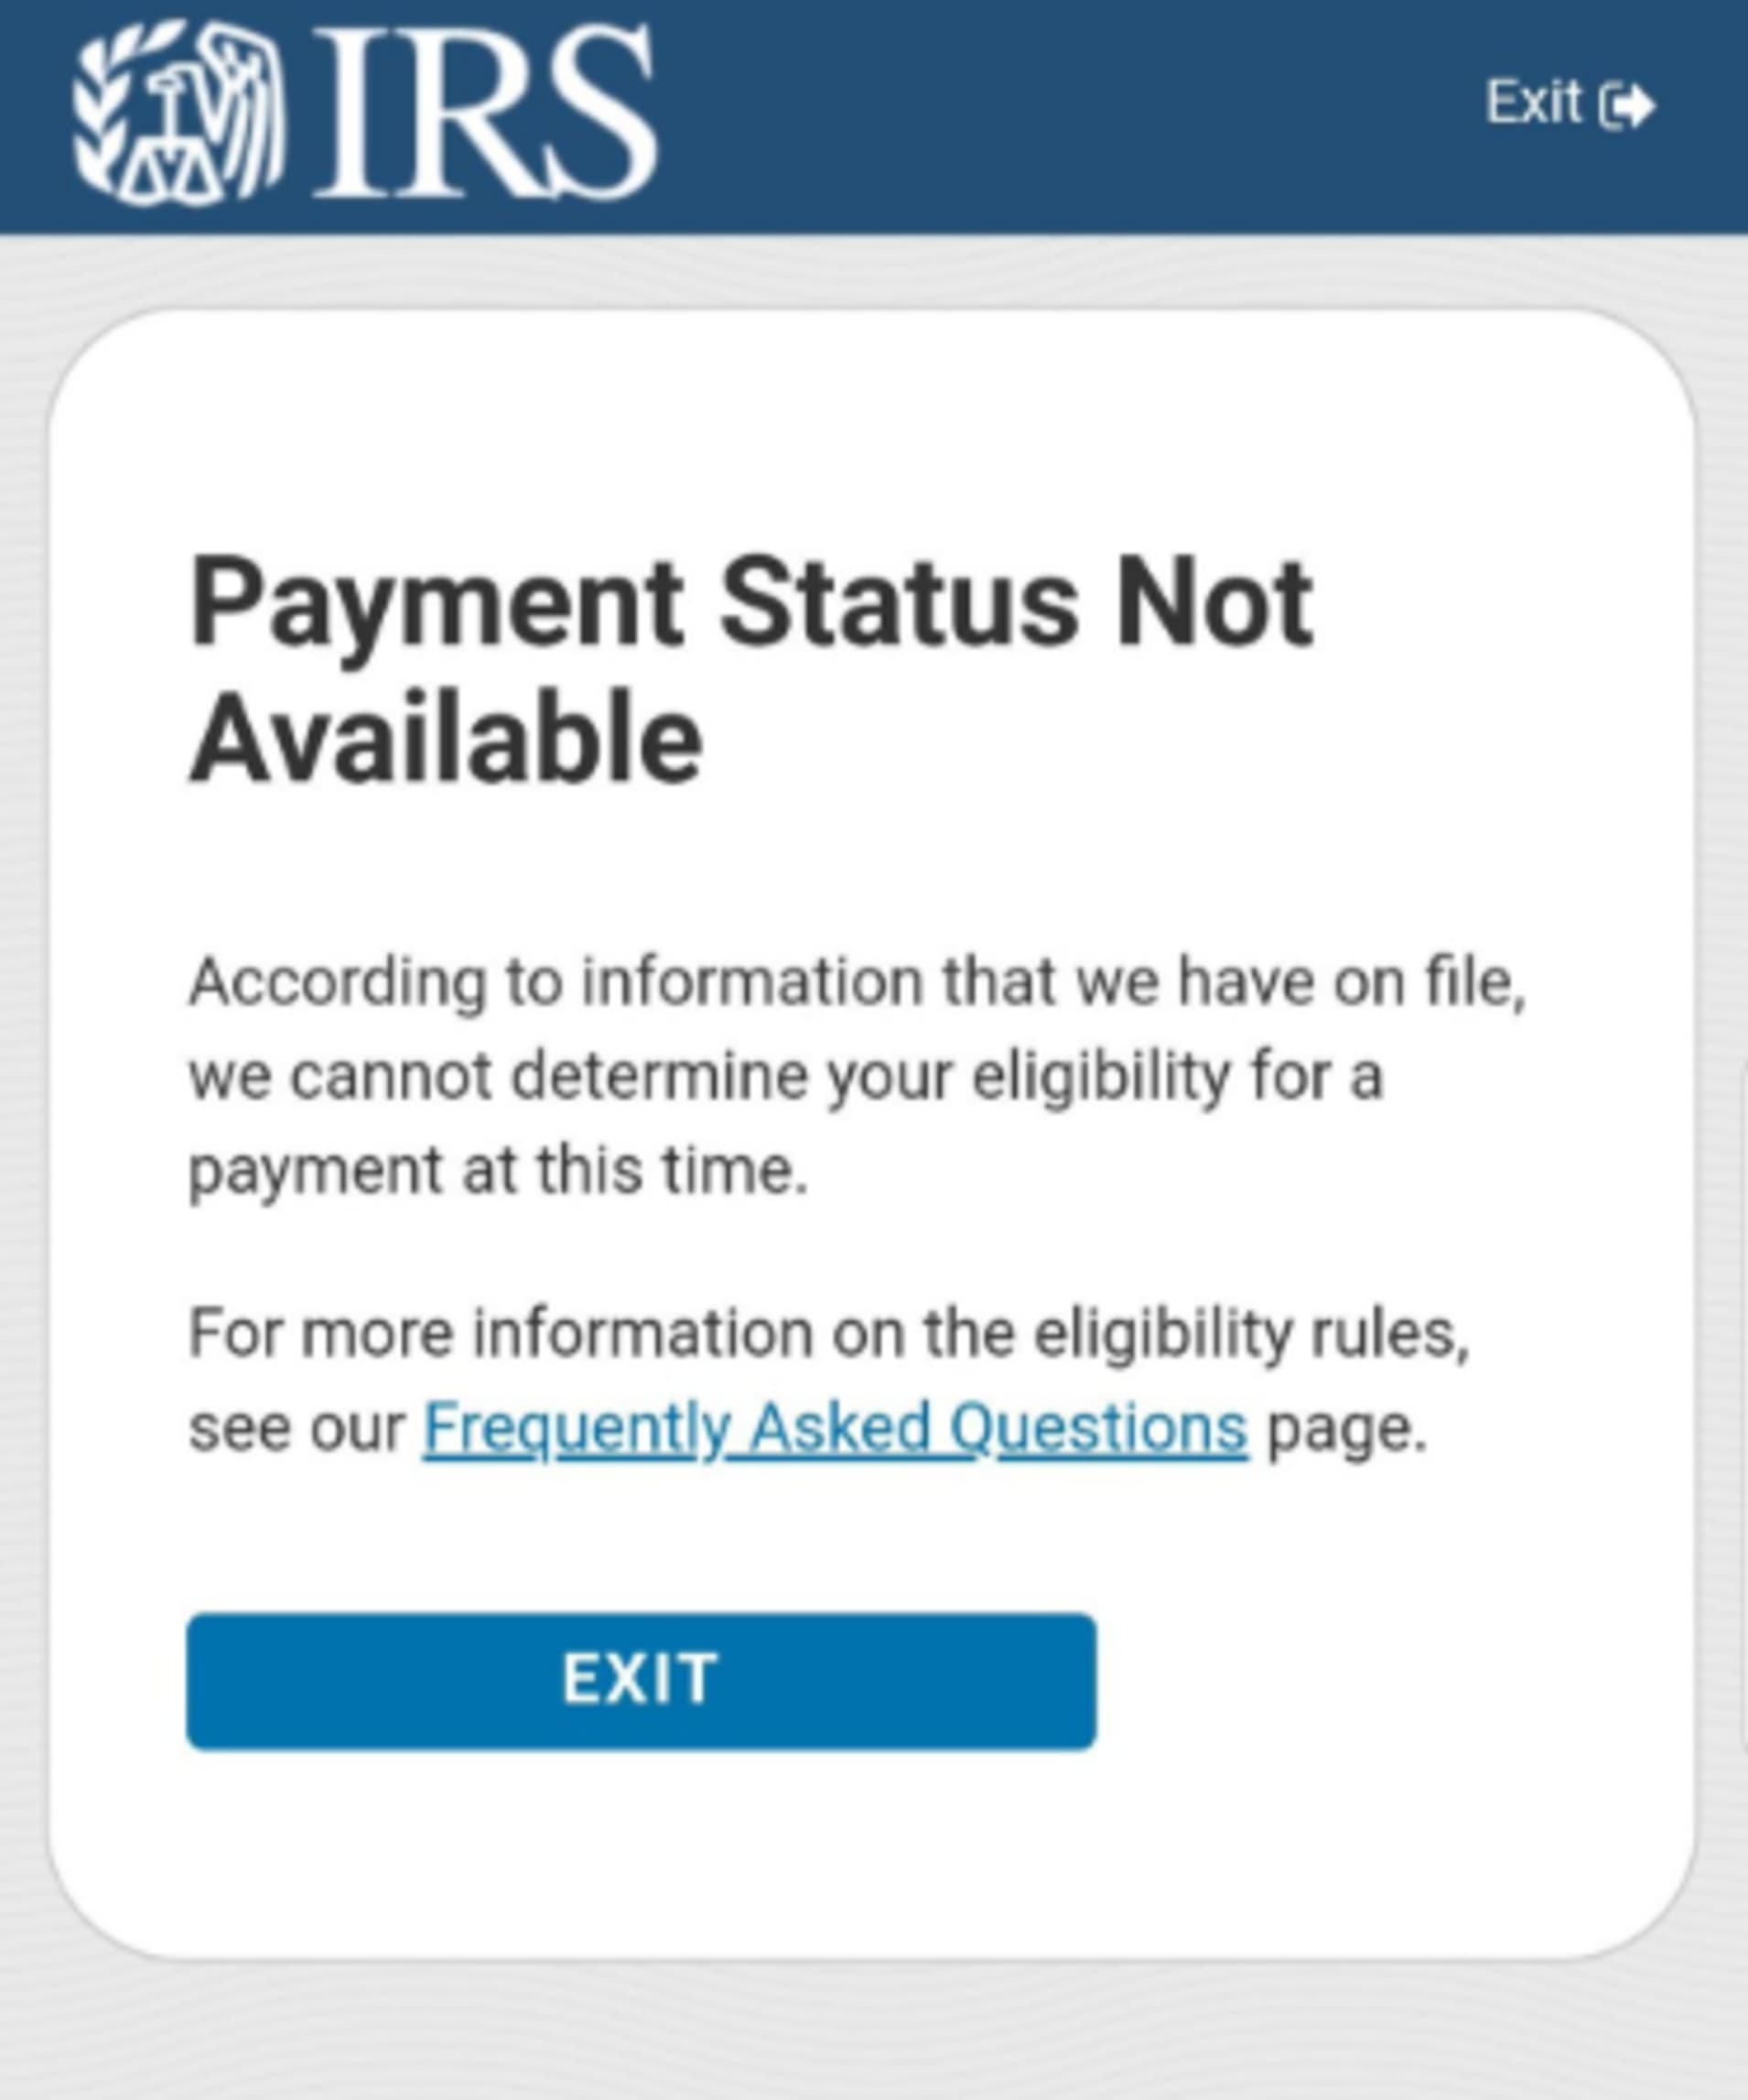 HO: Payment status not available